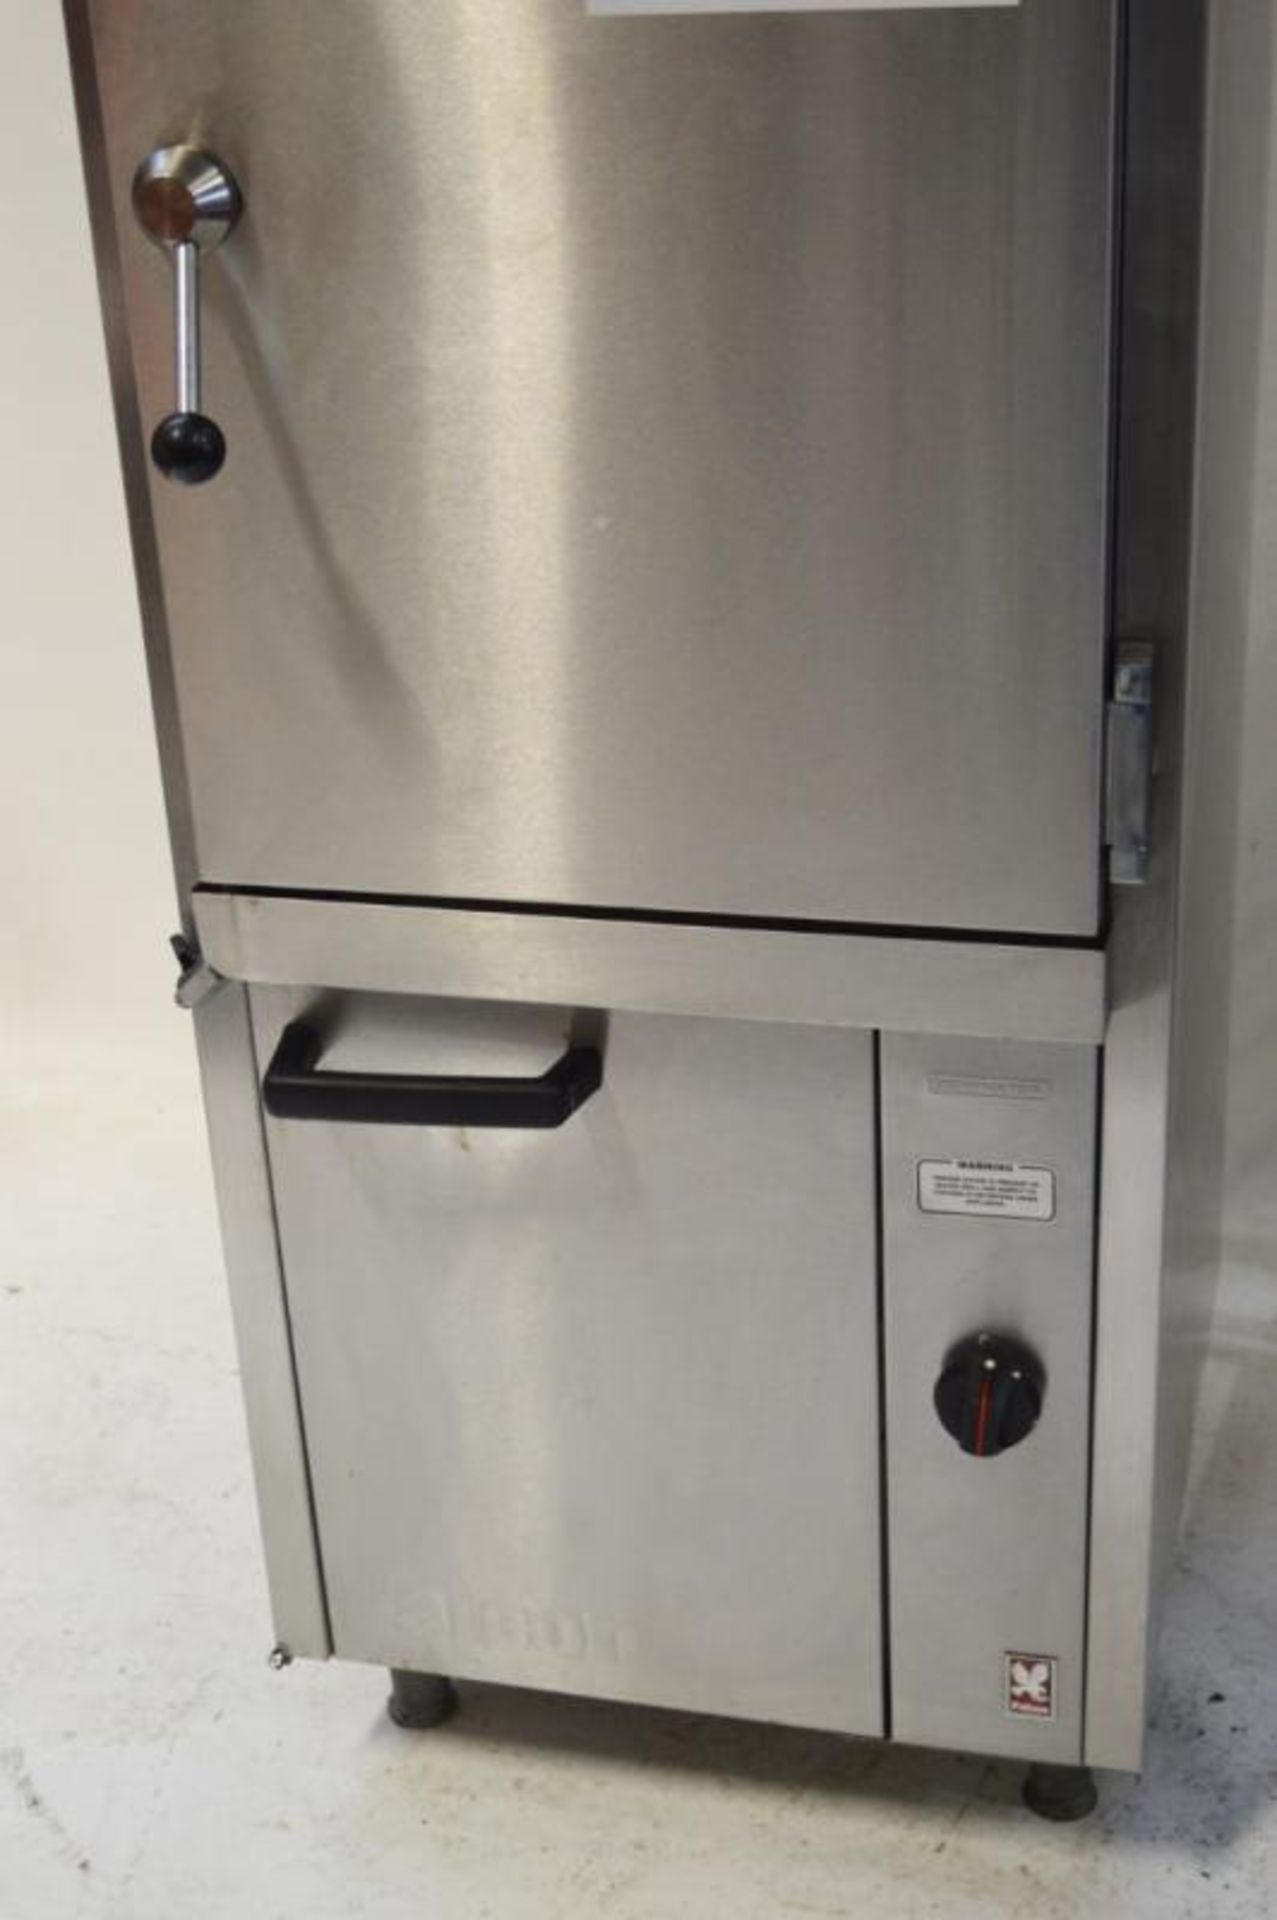 1 x Falcon G6478 LPG Propane Gas Atmospheric Steamer Oven - Stainless Steel Finish - H155 x W60 x D7 - Image 2 of 9